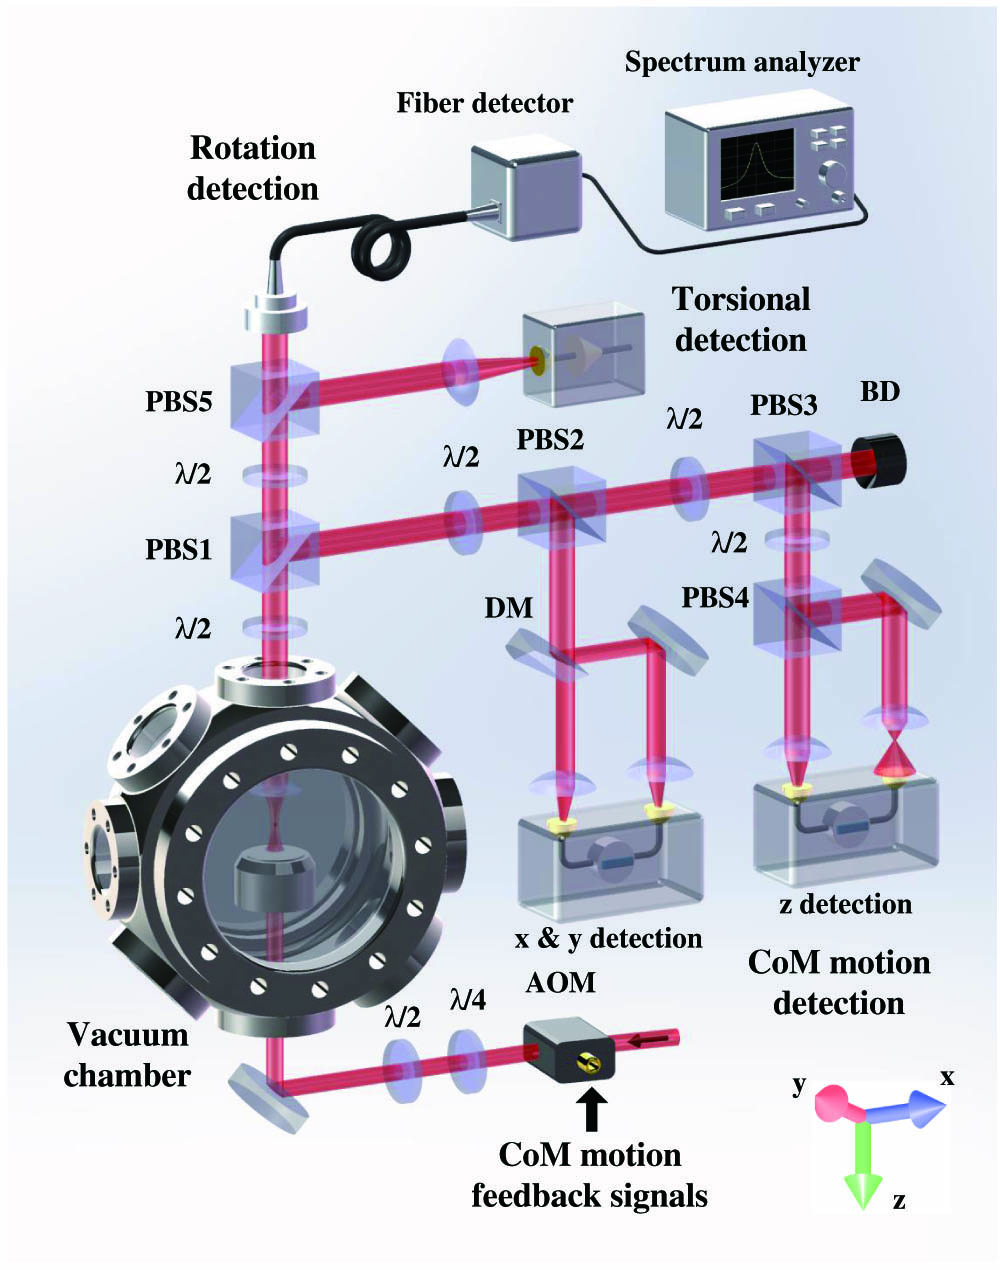 Schematic diagram of the experimental setup, which includes five parts: vacuum system, rotation detection, torsional vibration detection, CoM motion detection, and feedback system. AOM, acousto-optic modulator; λ/4, quarter-wave plate; λ/2, half-wave plate; PBS1–PBS5, polarized beam splitters; DM, D-shape mirror; BD, beam dump.